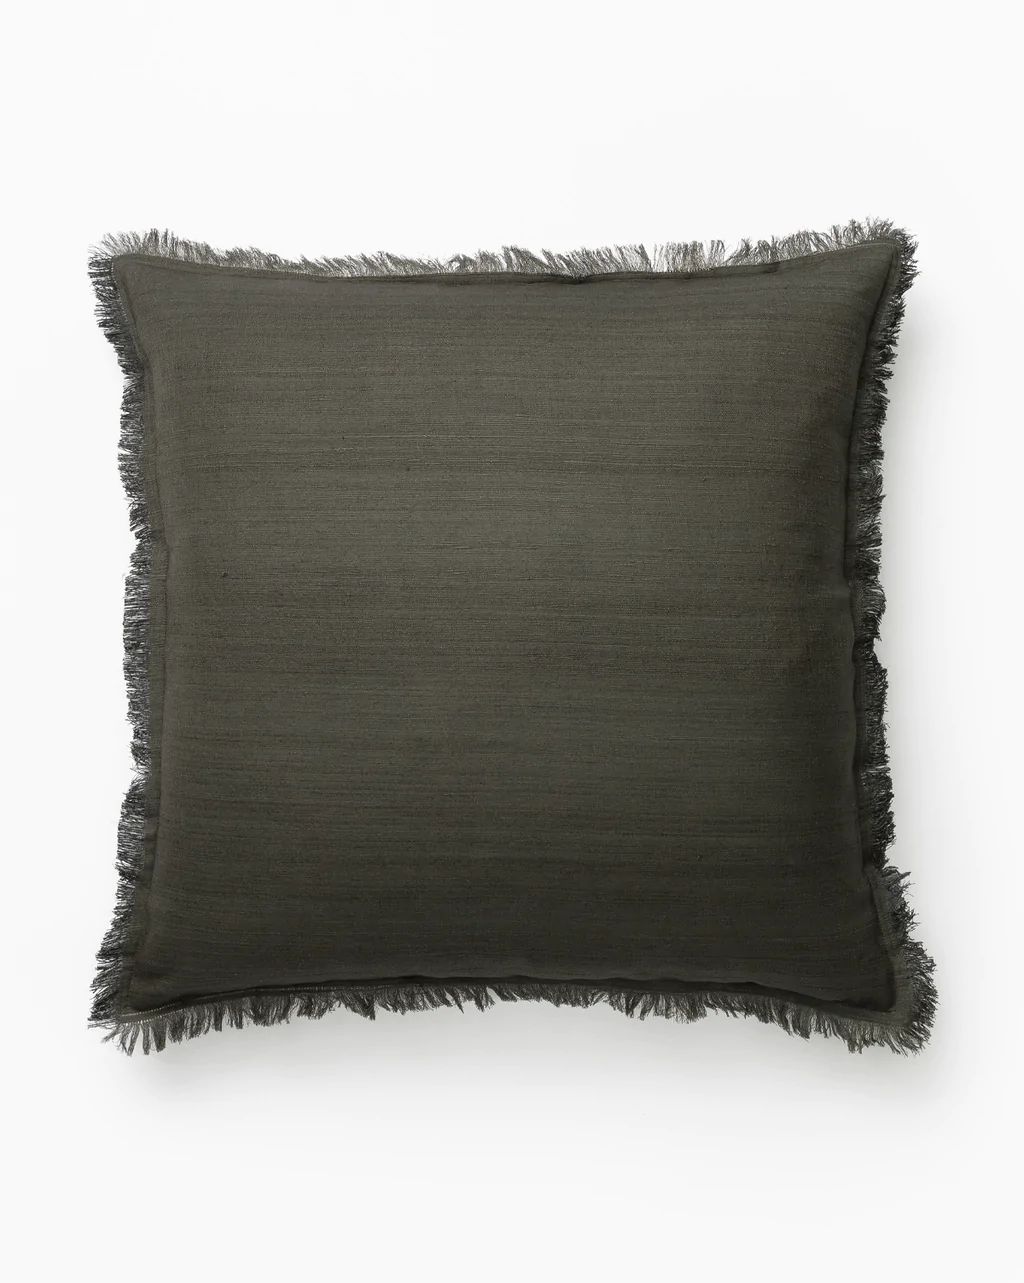 Abbey Silk Fringe Pillow Cover | McGee & Co.